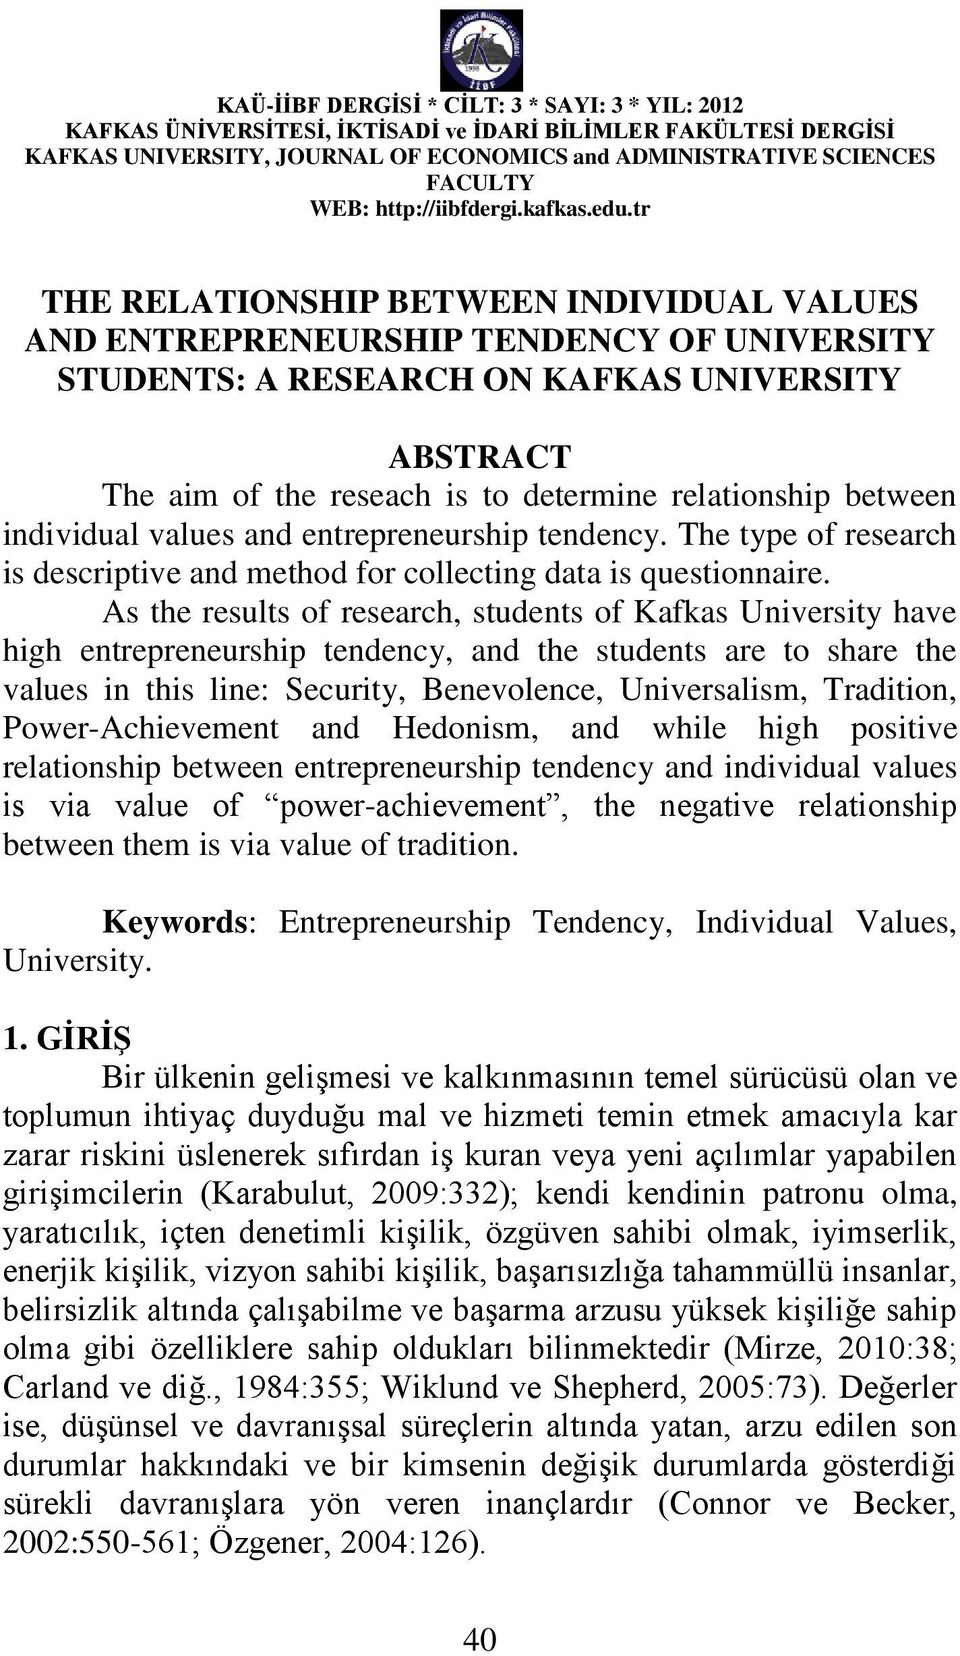 As the results of research, students of Kafkas University have high entrepreneurship tendency, and the students are to share the values in this line: Security, Benevolence, Universalism, Tradition,